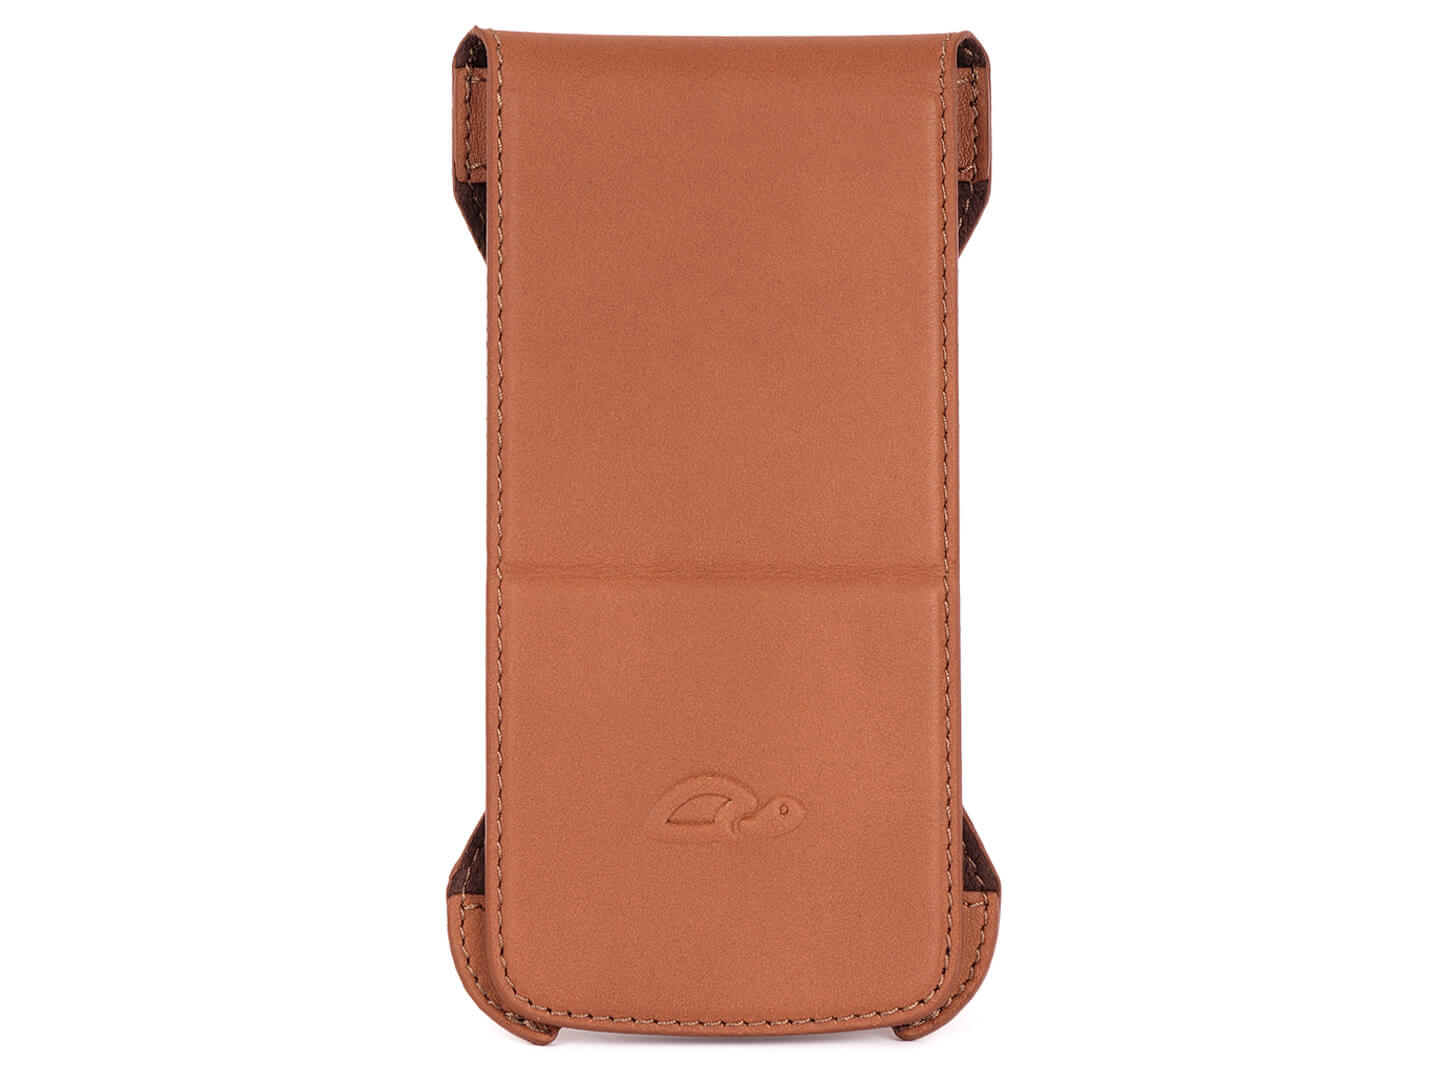 iPhone 6 Plus Flip Case - Vegtan Leather - Stand Function - Card Slot - top - tan - Carapaz